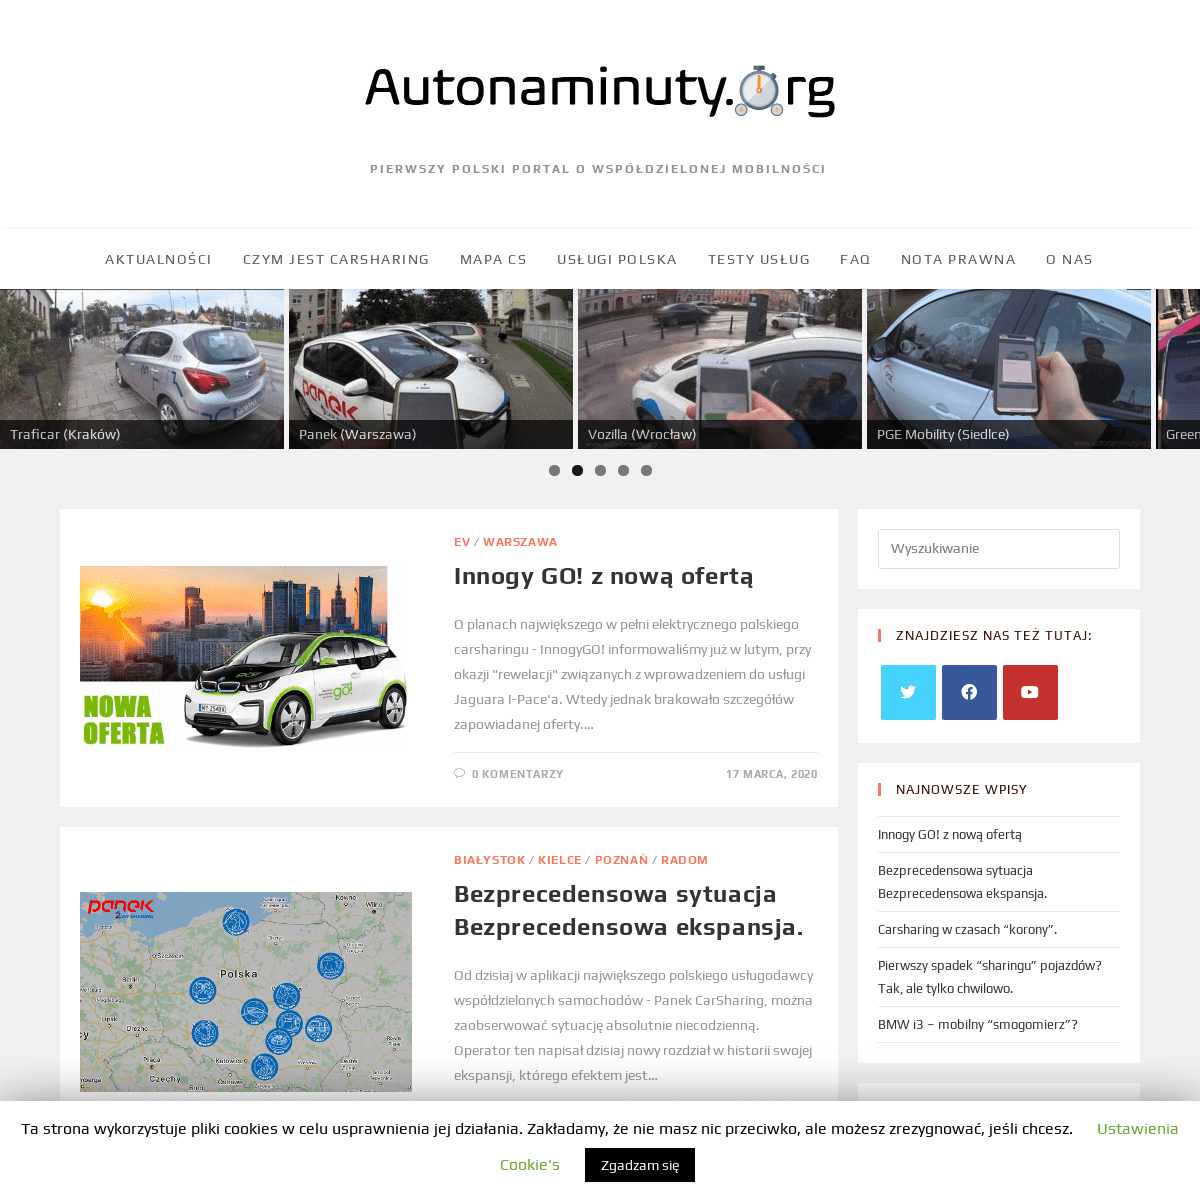 A complete backup of autonaminuty.org